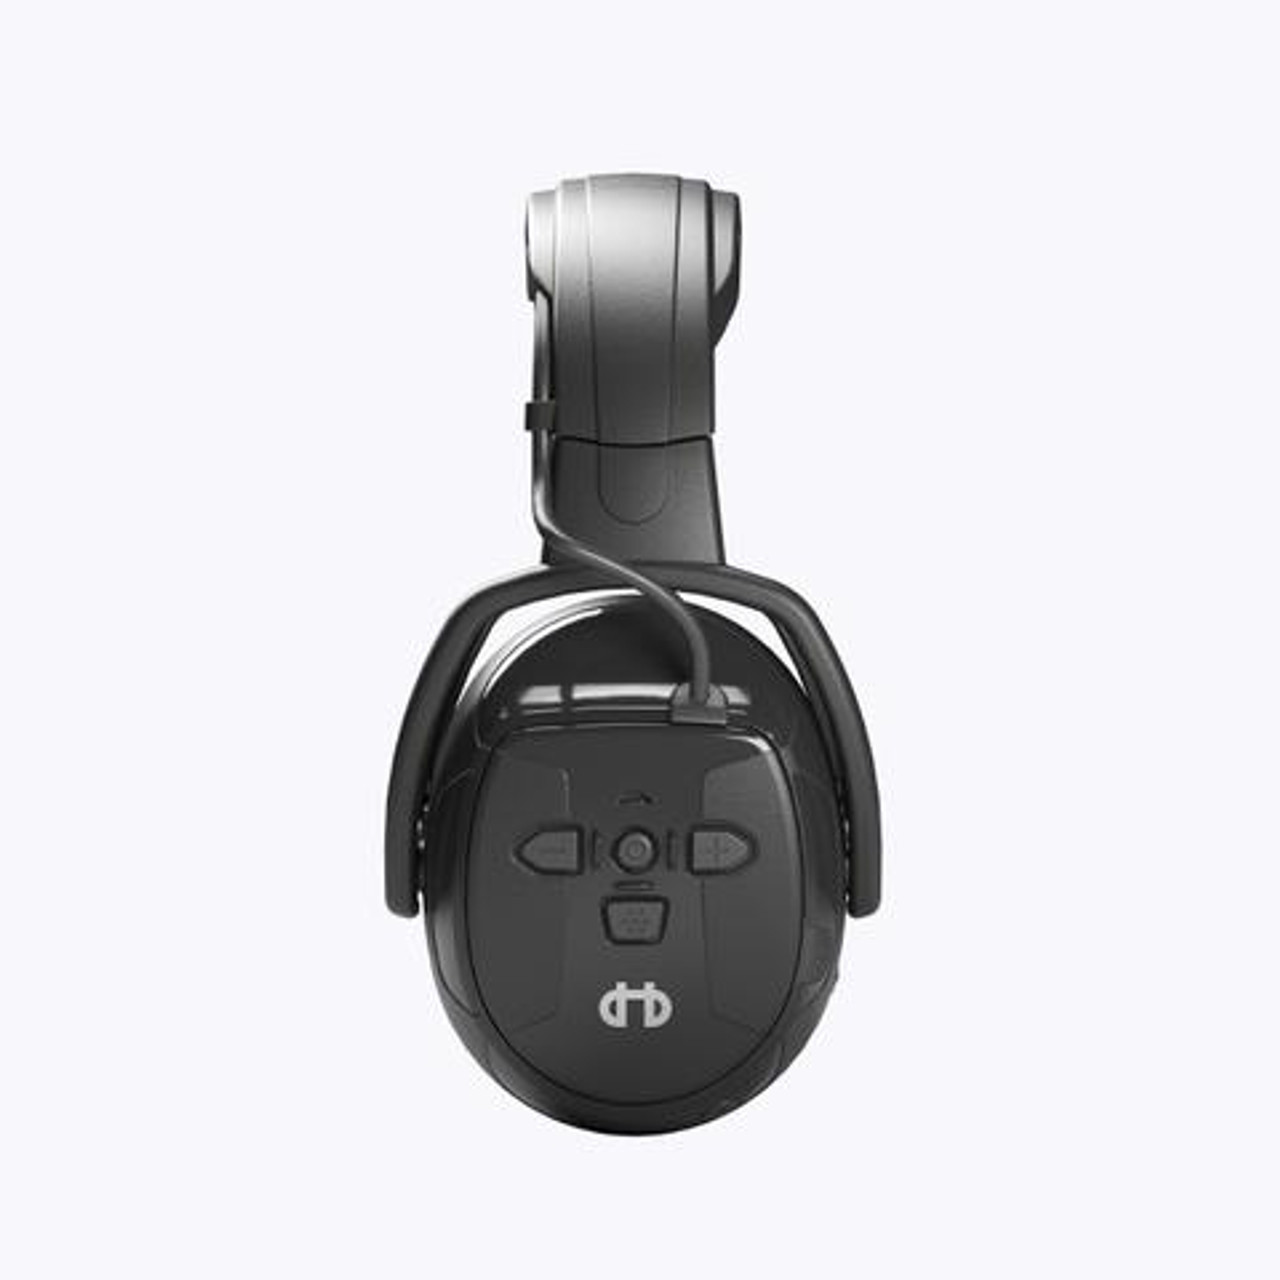 HELLBERG Ear Muffs | Xstream LD Class 2 Waterproof, Active Monitoring and Bluetooth Earmuffs  with Headband for Excavator Operators, Landscapers in Melbourne, Sydney and Brisbane.